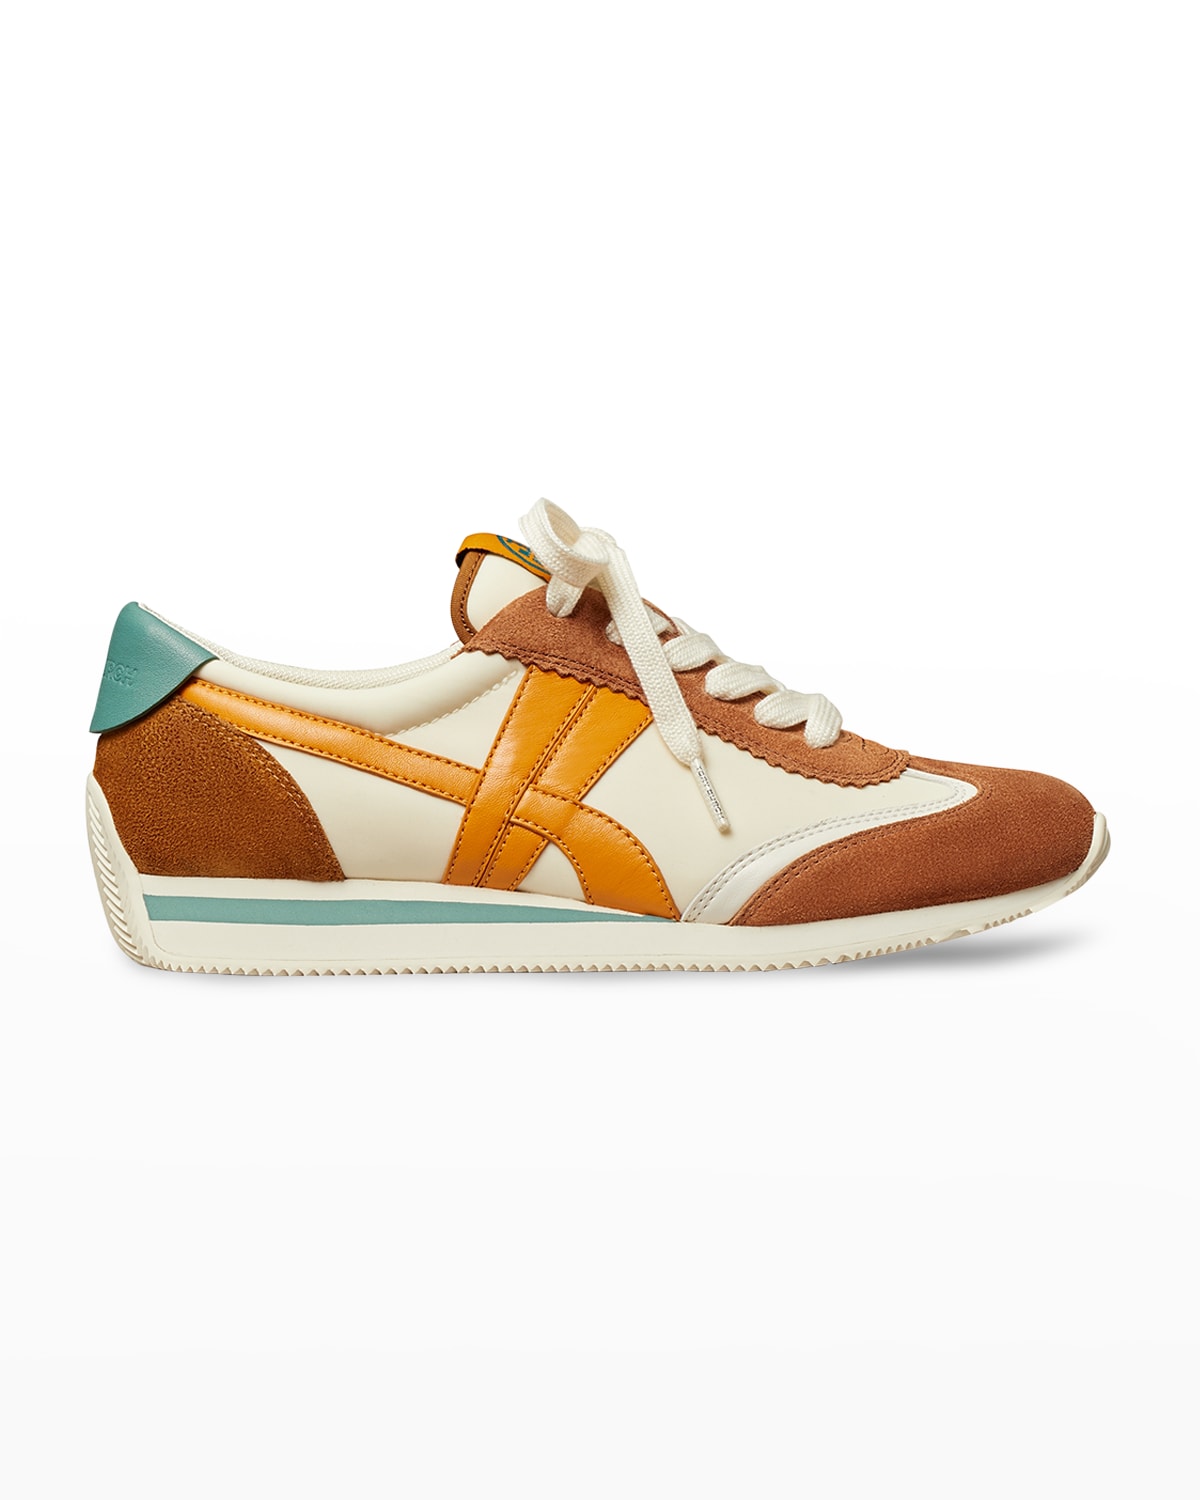 TORY BURCH HANK MIXED LEATHER RETRO SNEAKERS